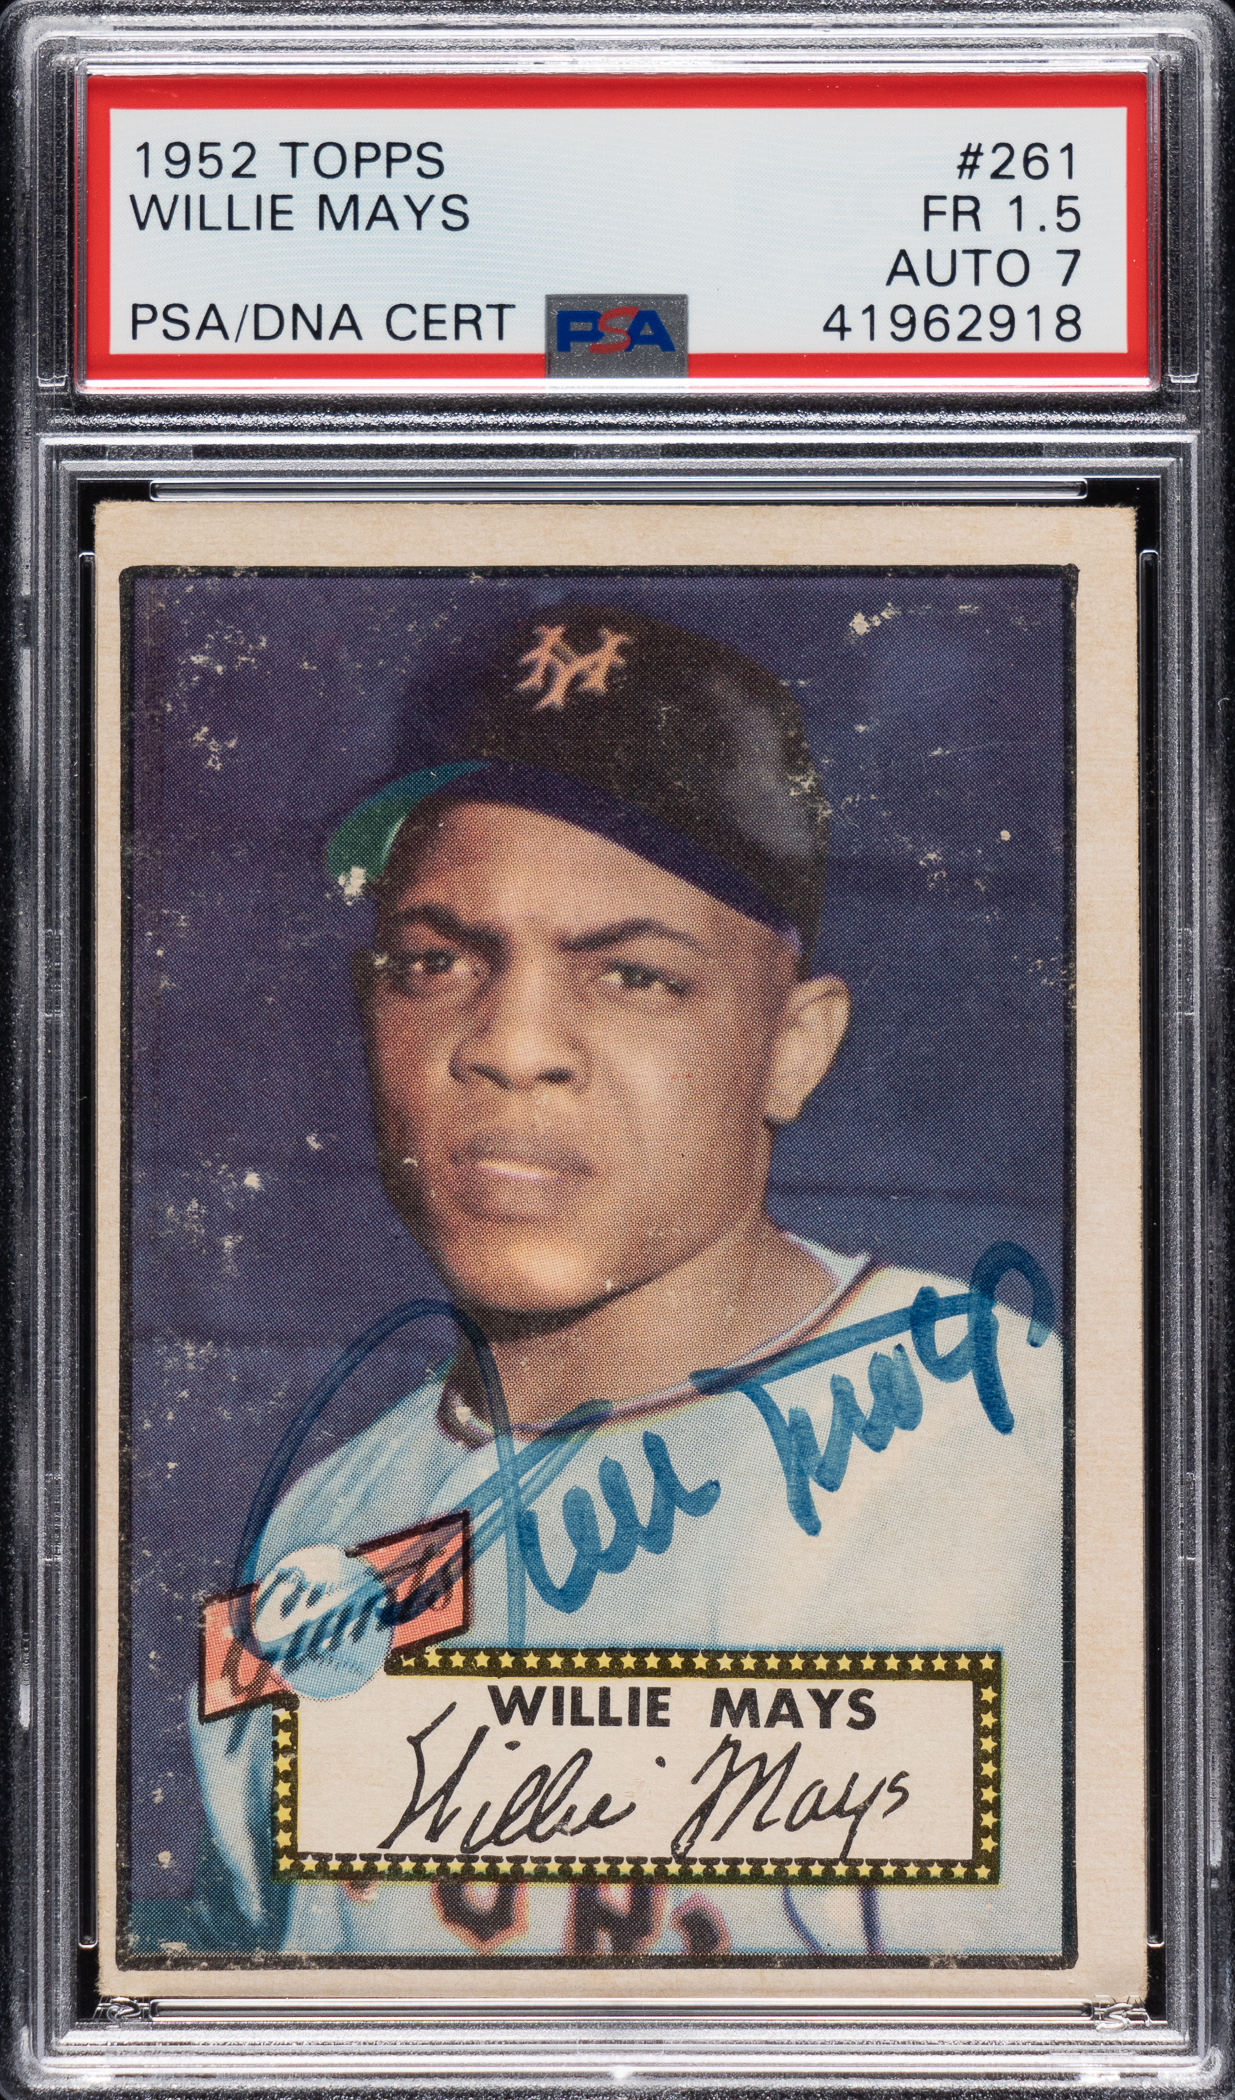 A 1952 Topps Willie Mays PSA Fair 1.5 with a NM 7 signature sold for $16,800